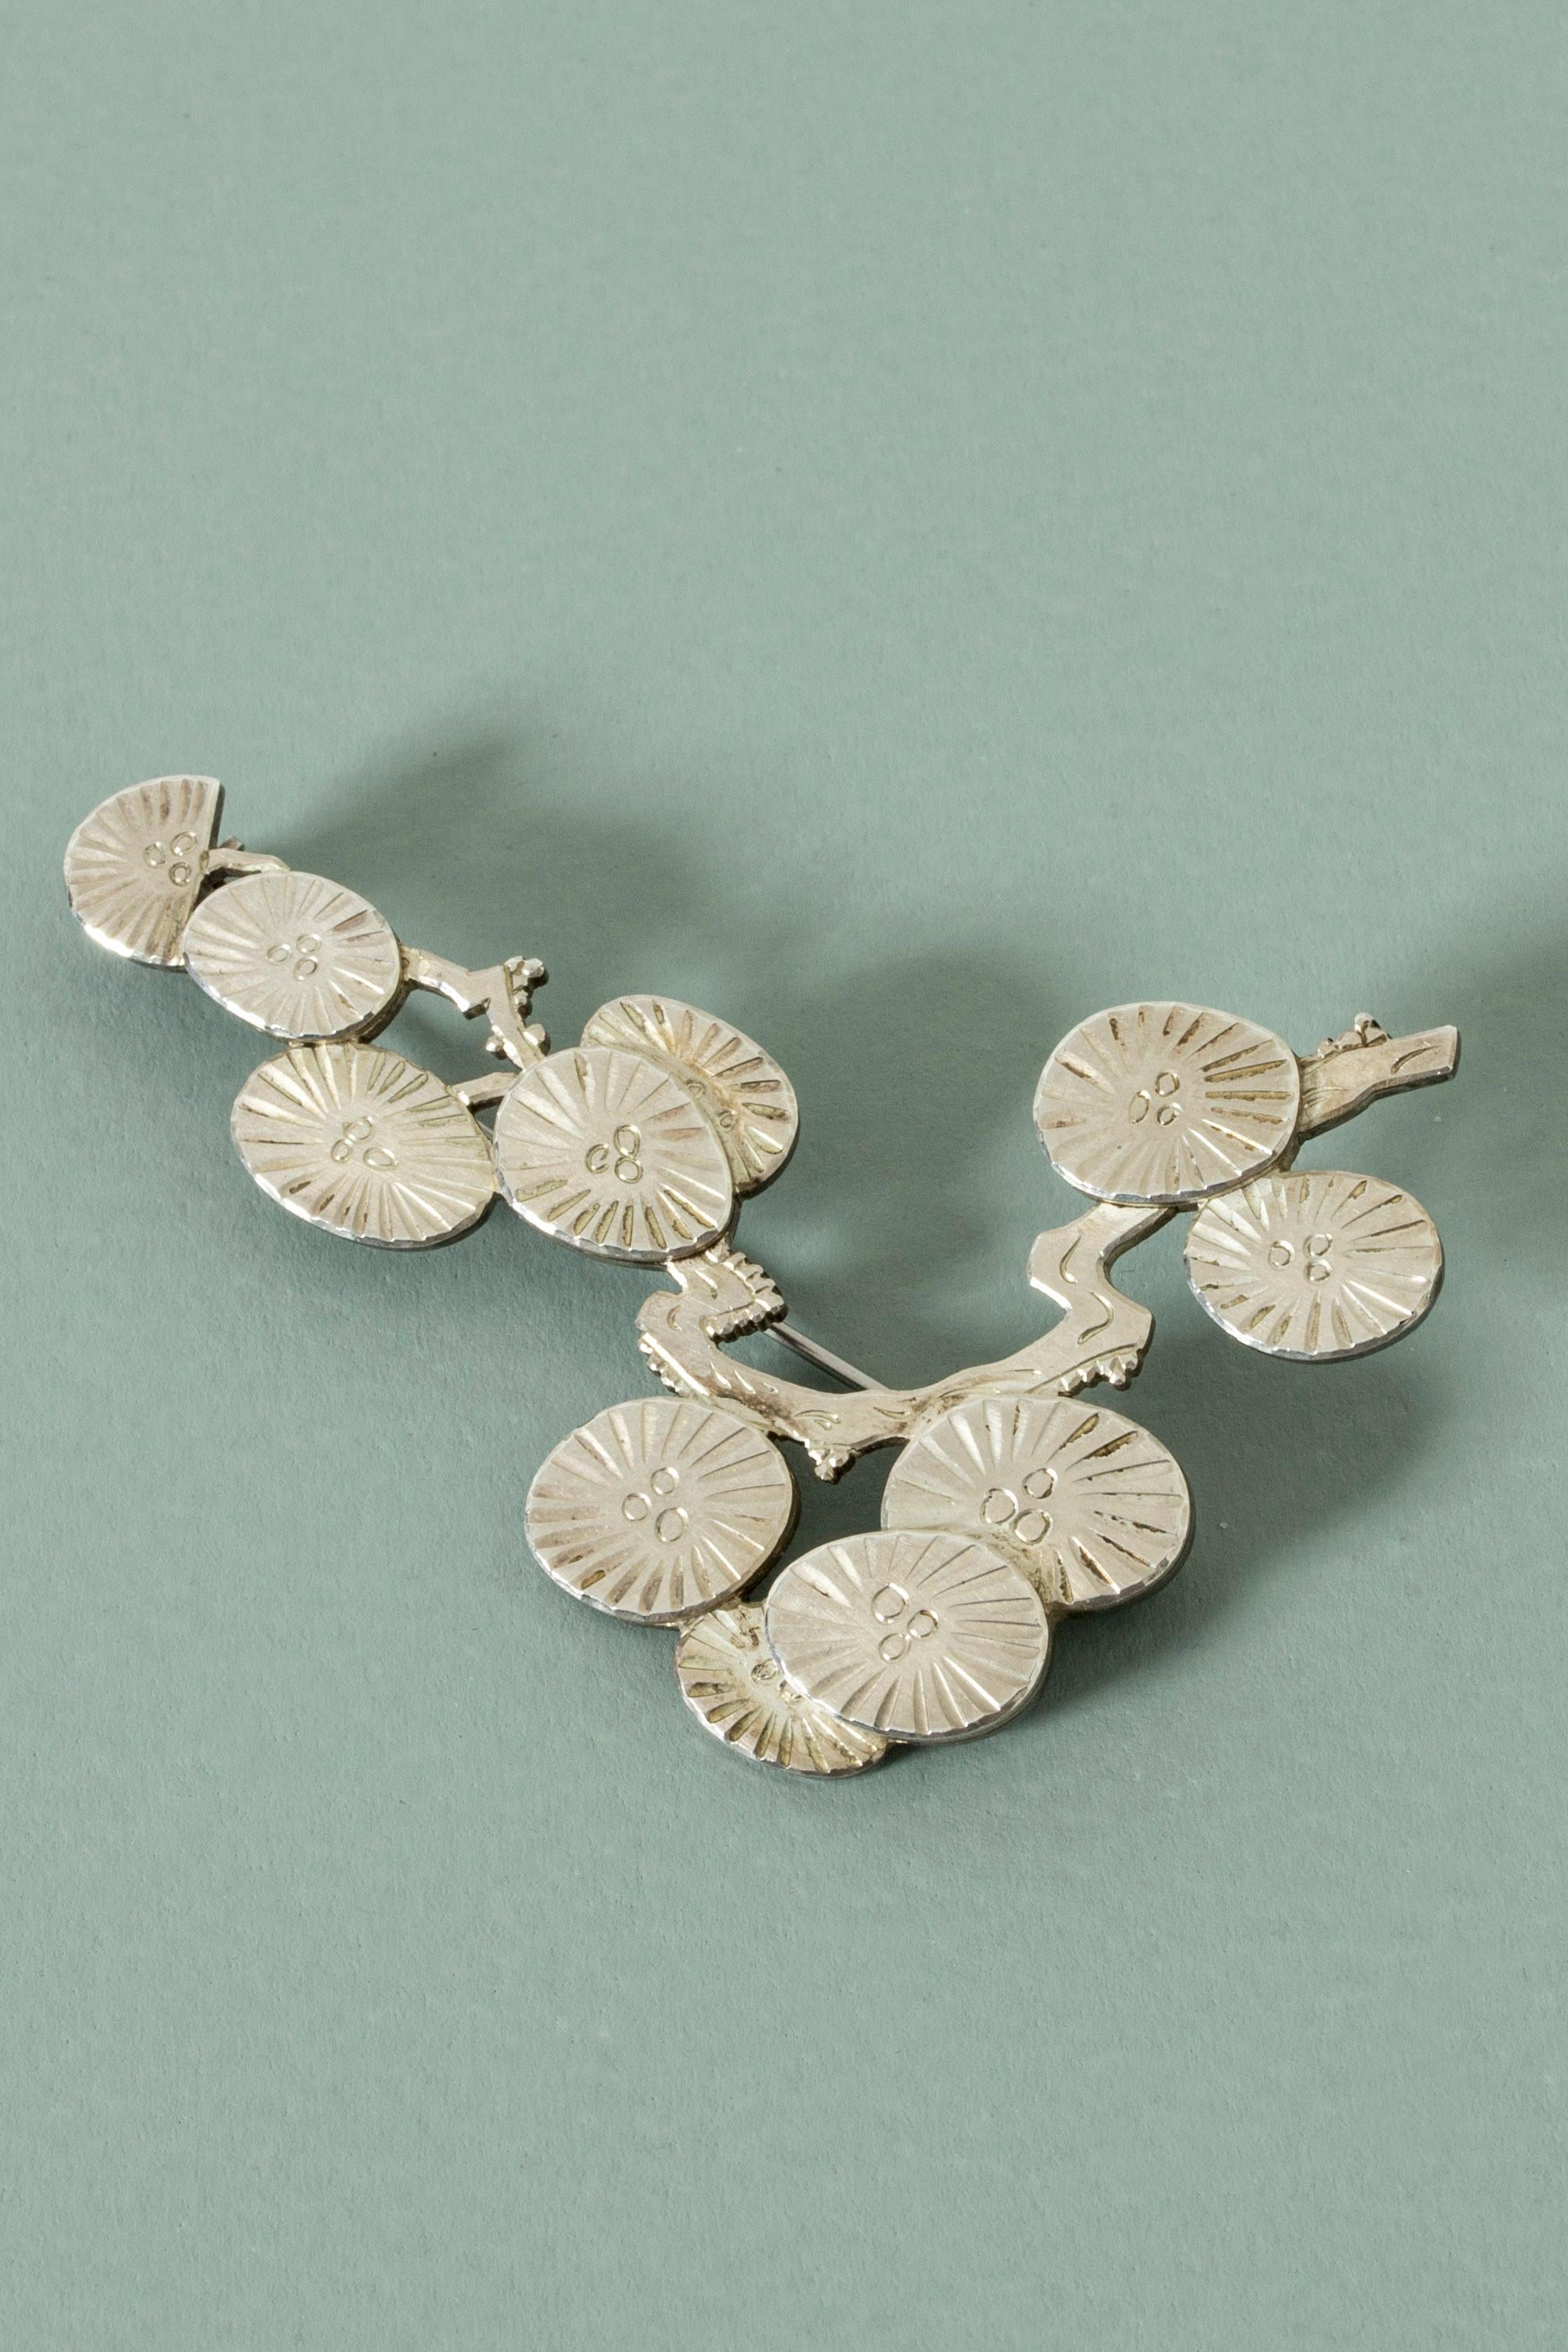 Beautiful silver brooch by Wiwen Nilsson, in the form of a blossoming cherry branch. A classic, elegant design with lovely attention to detail.
